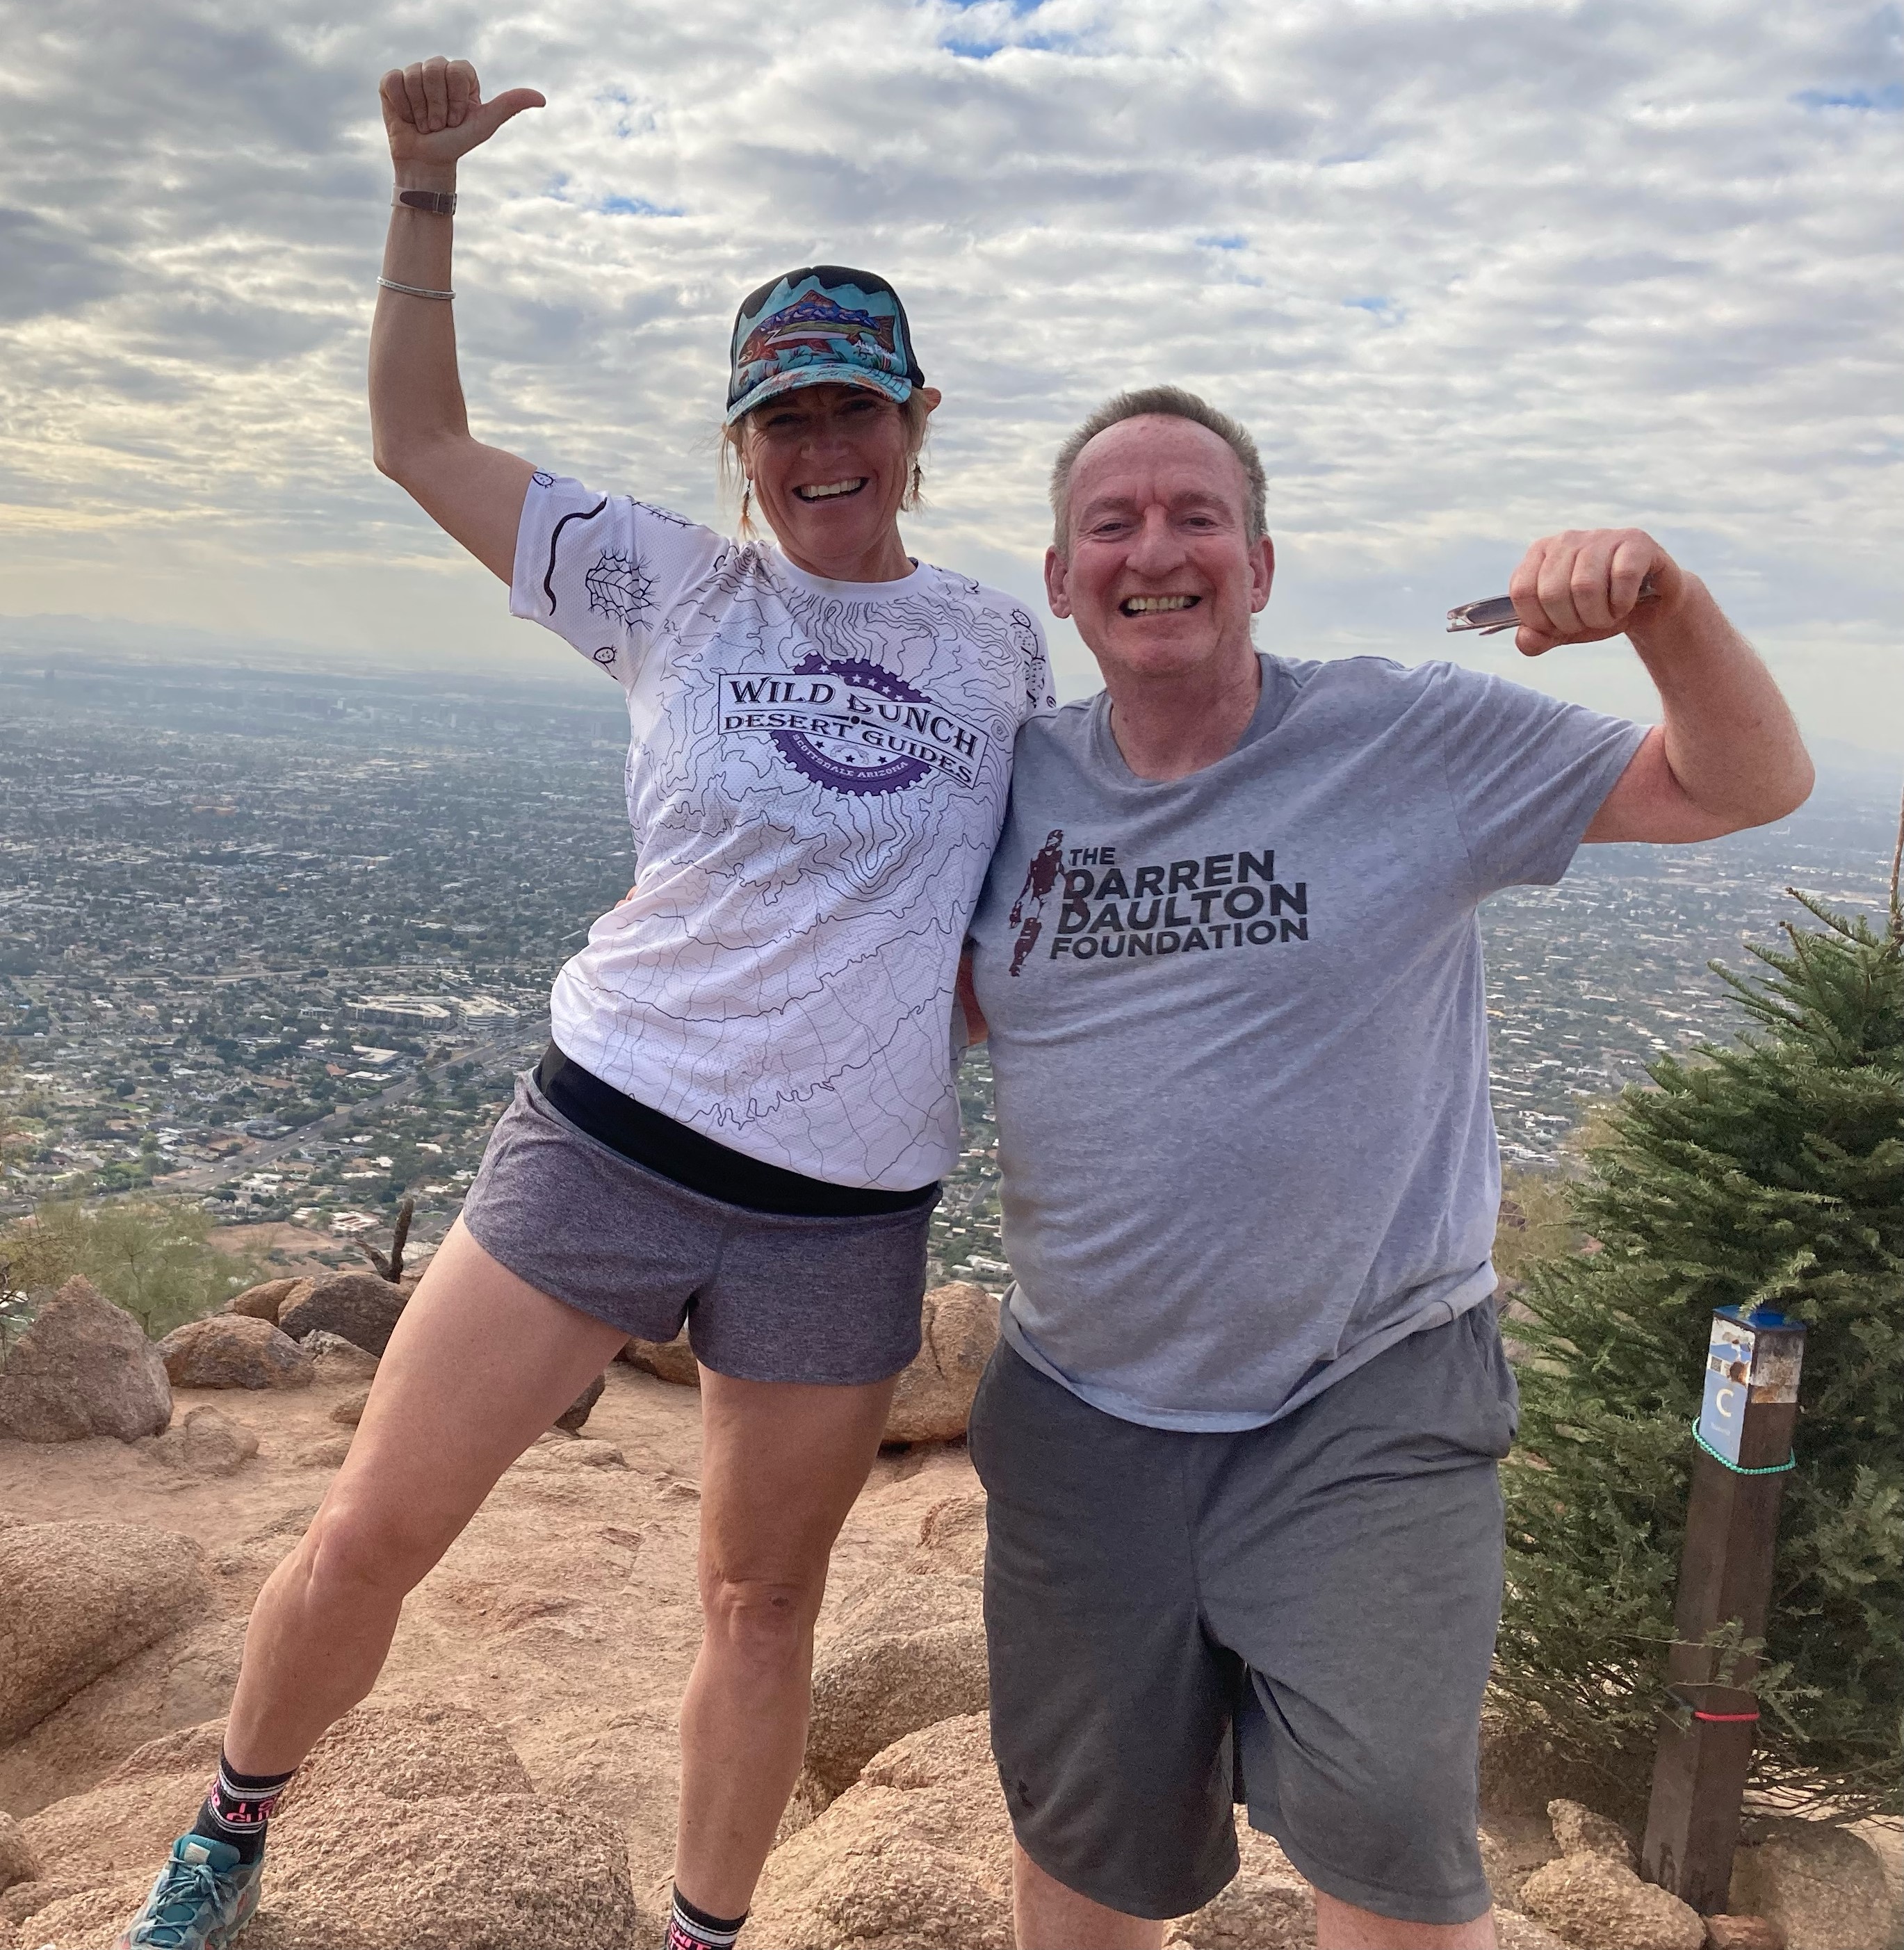 Laurel Darren (left), the Wild Bunch Desert Guides owner, celebrates reaching the summit of Phoenix's iconic Camelback Mountain with first-time guest John Duffin. The panoramic views of Phoenix serve as their beautiful backdrop.